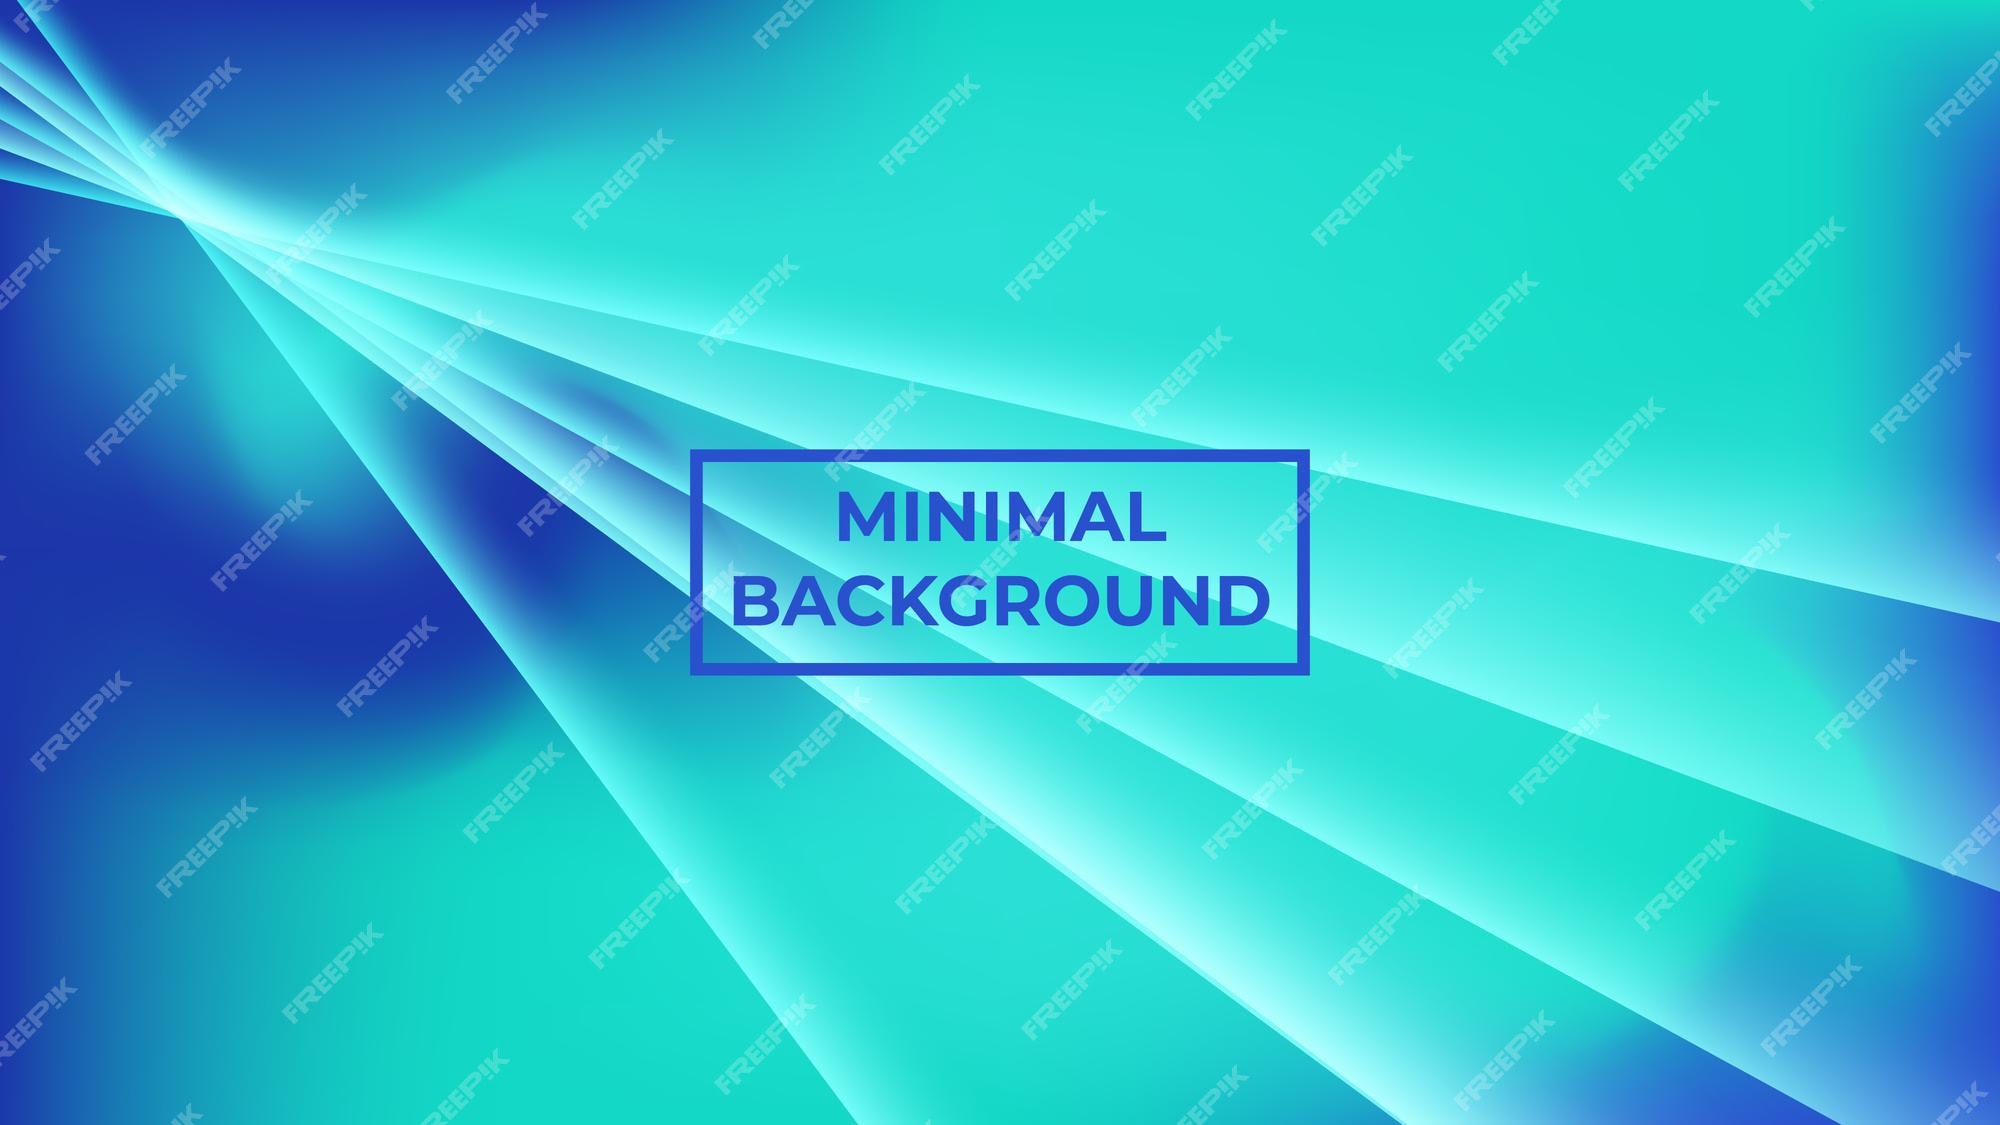 Premium Vector | Minimal background with a mix of teal dark blue and white  light easy to edit